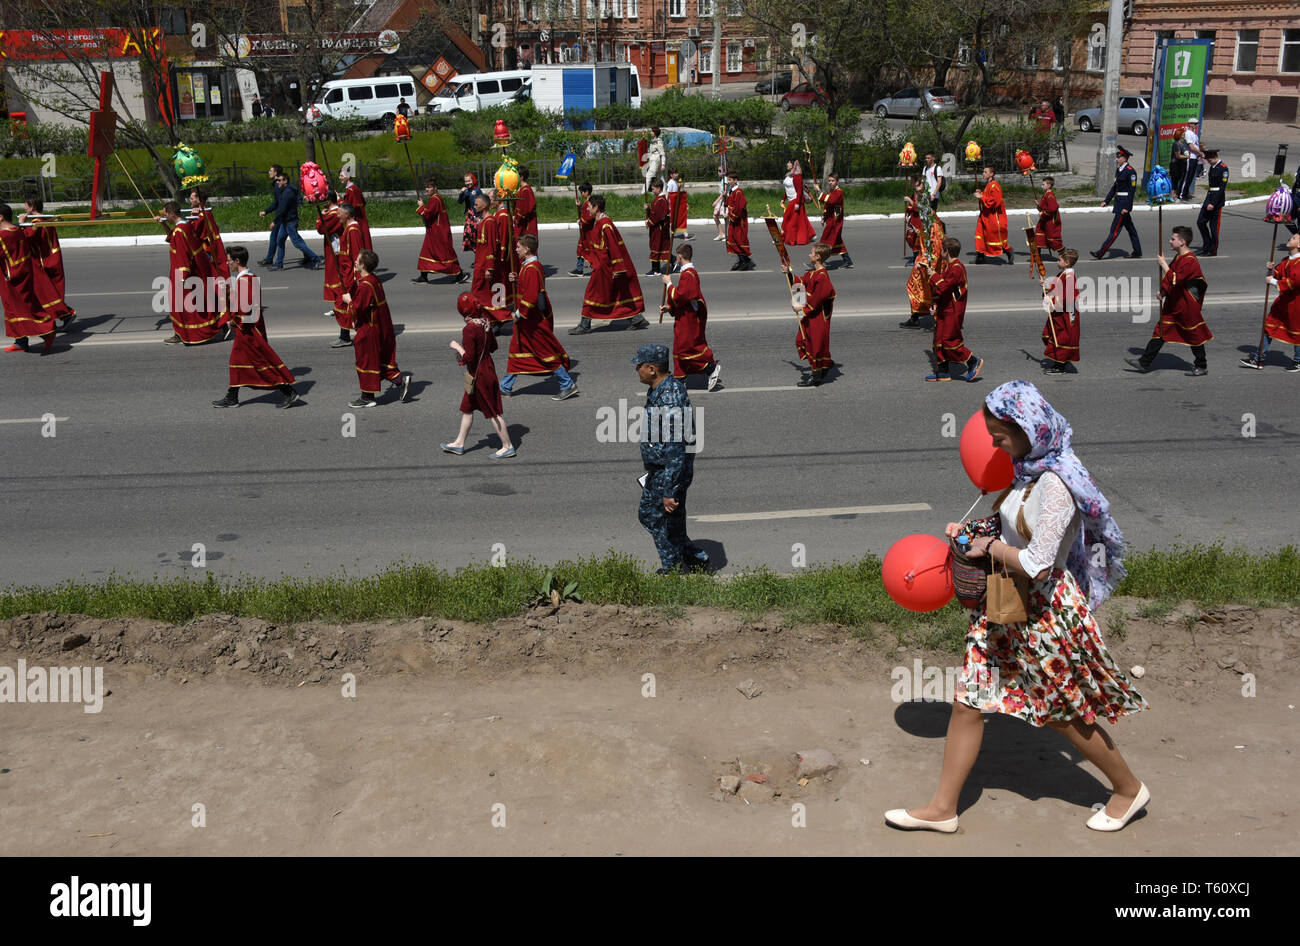 Orthodox Easter religious procession in Astrakhan, Russia Stock Photo